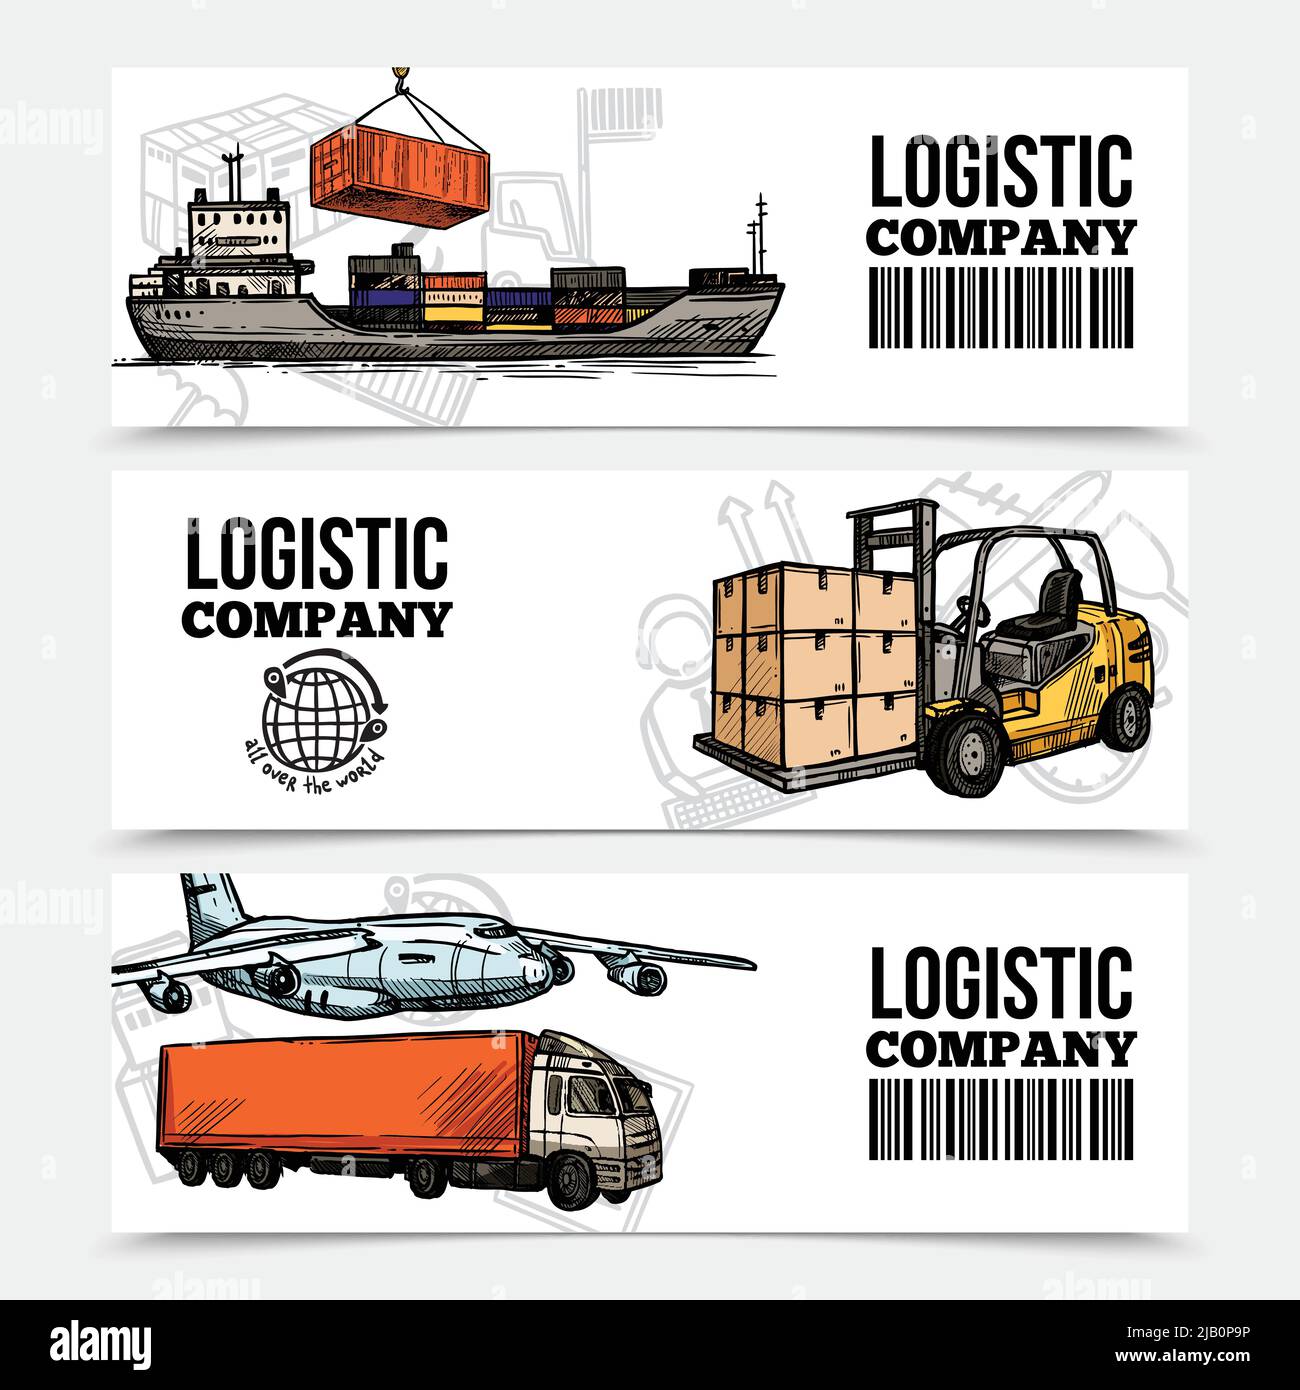 Logistics horizontal banners with different transport vehicles in hand drawn style vector illustration Stock Vector